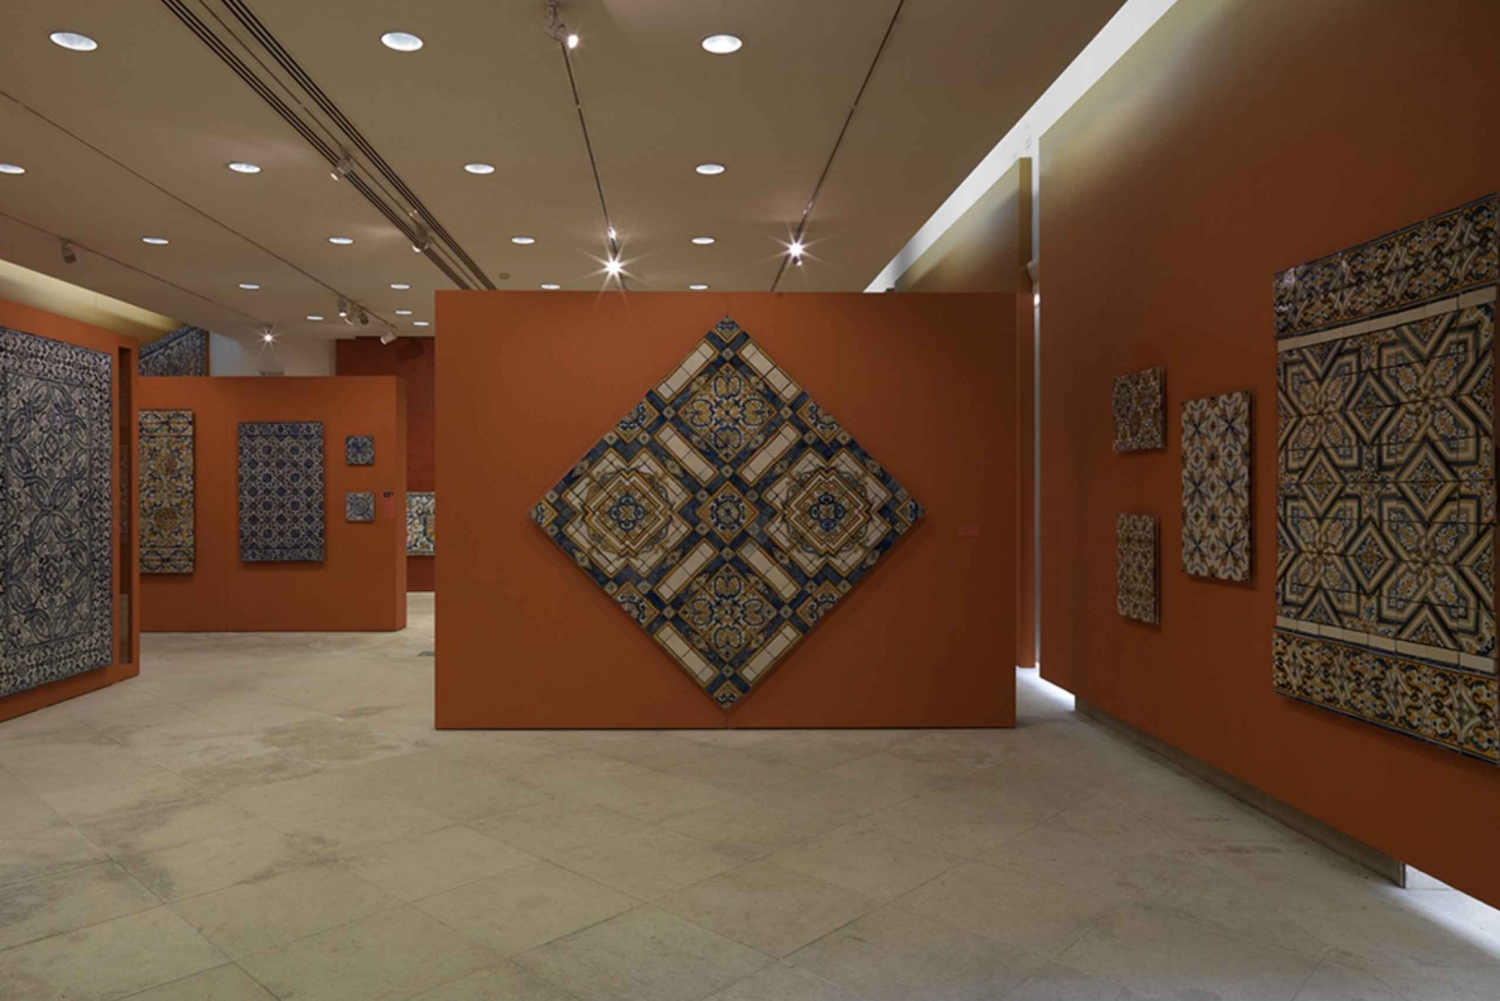 Visit-the-National-Tile-Museum